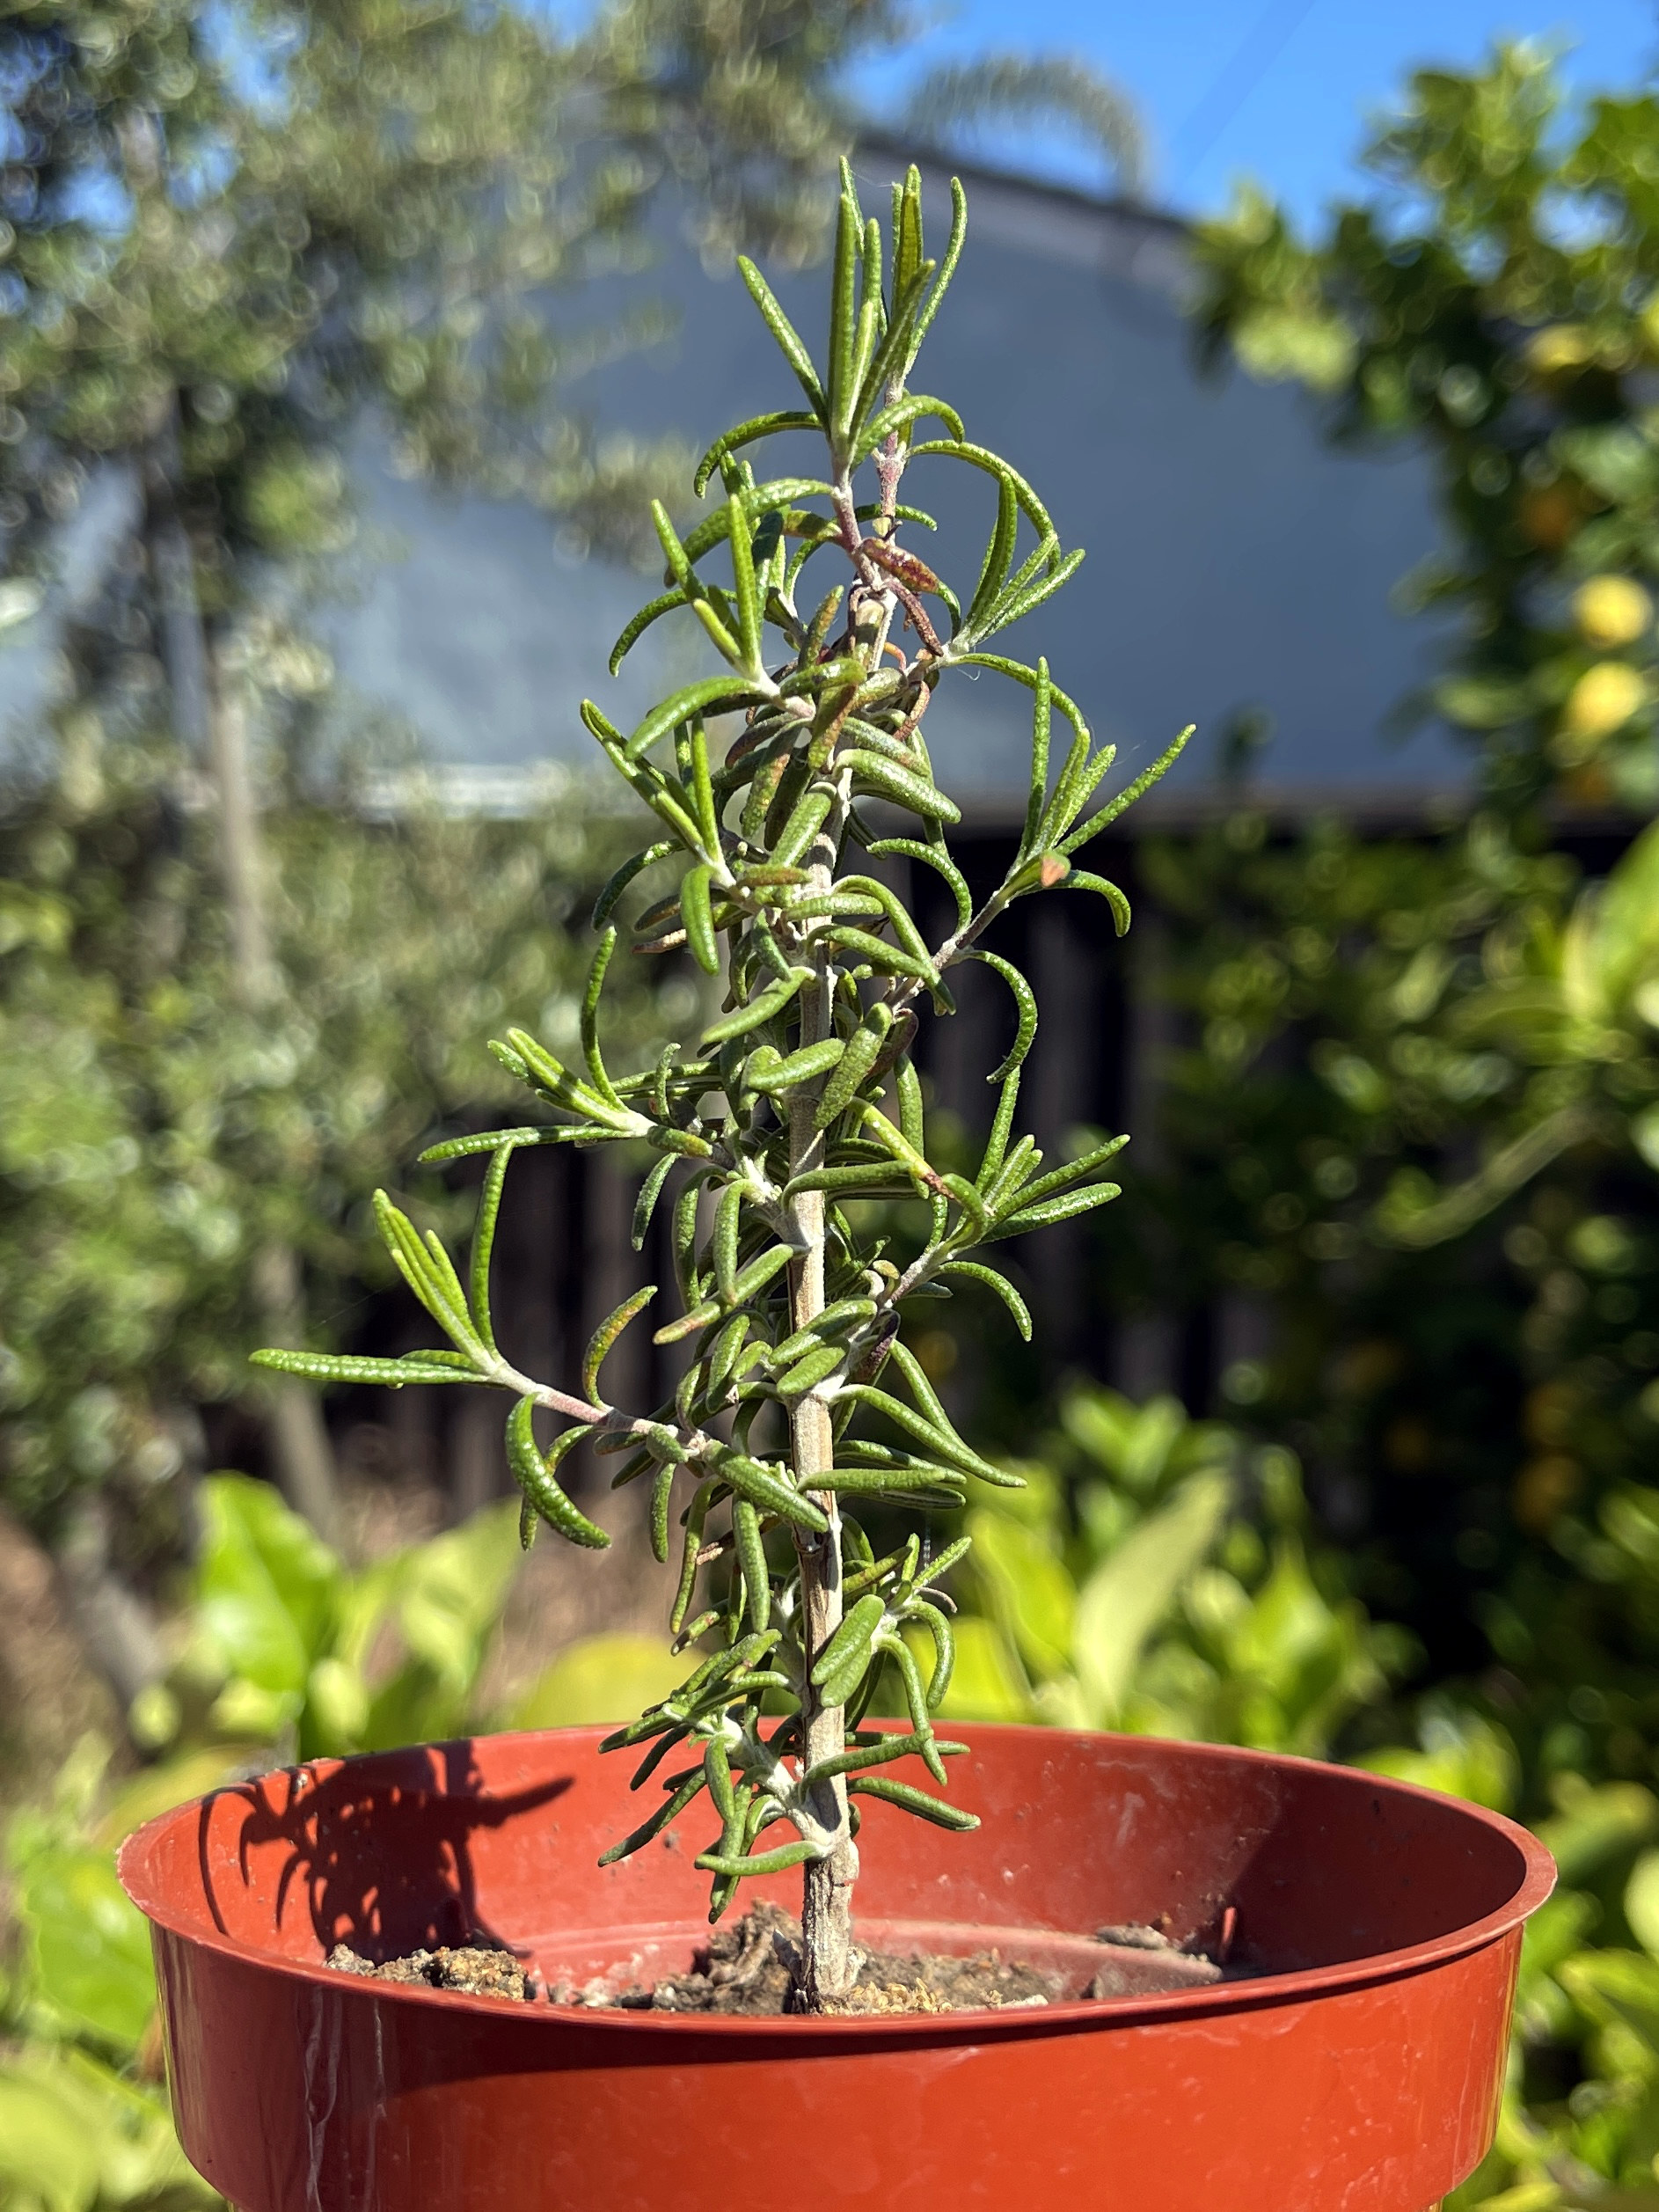 rosemary regrown from a sprig